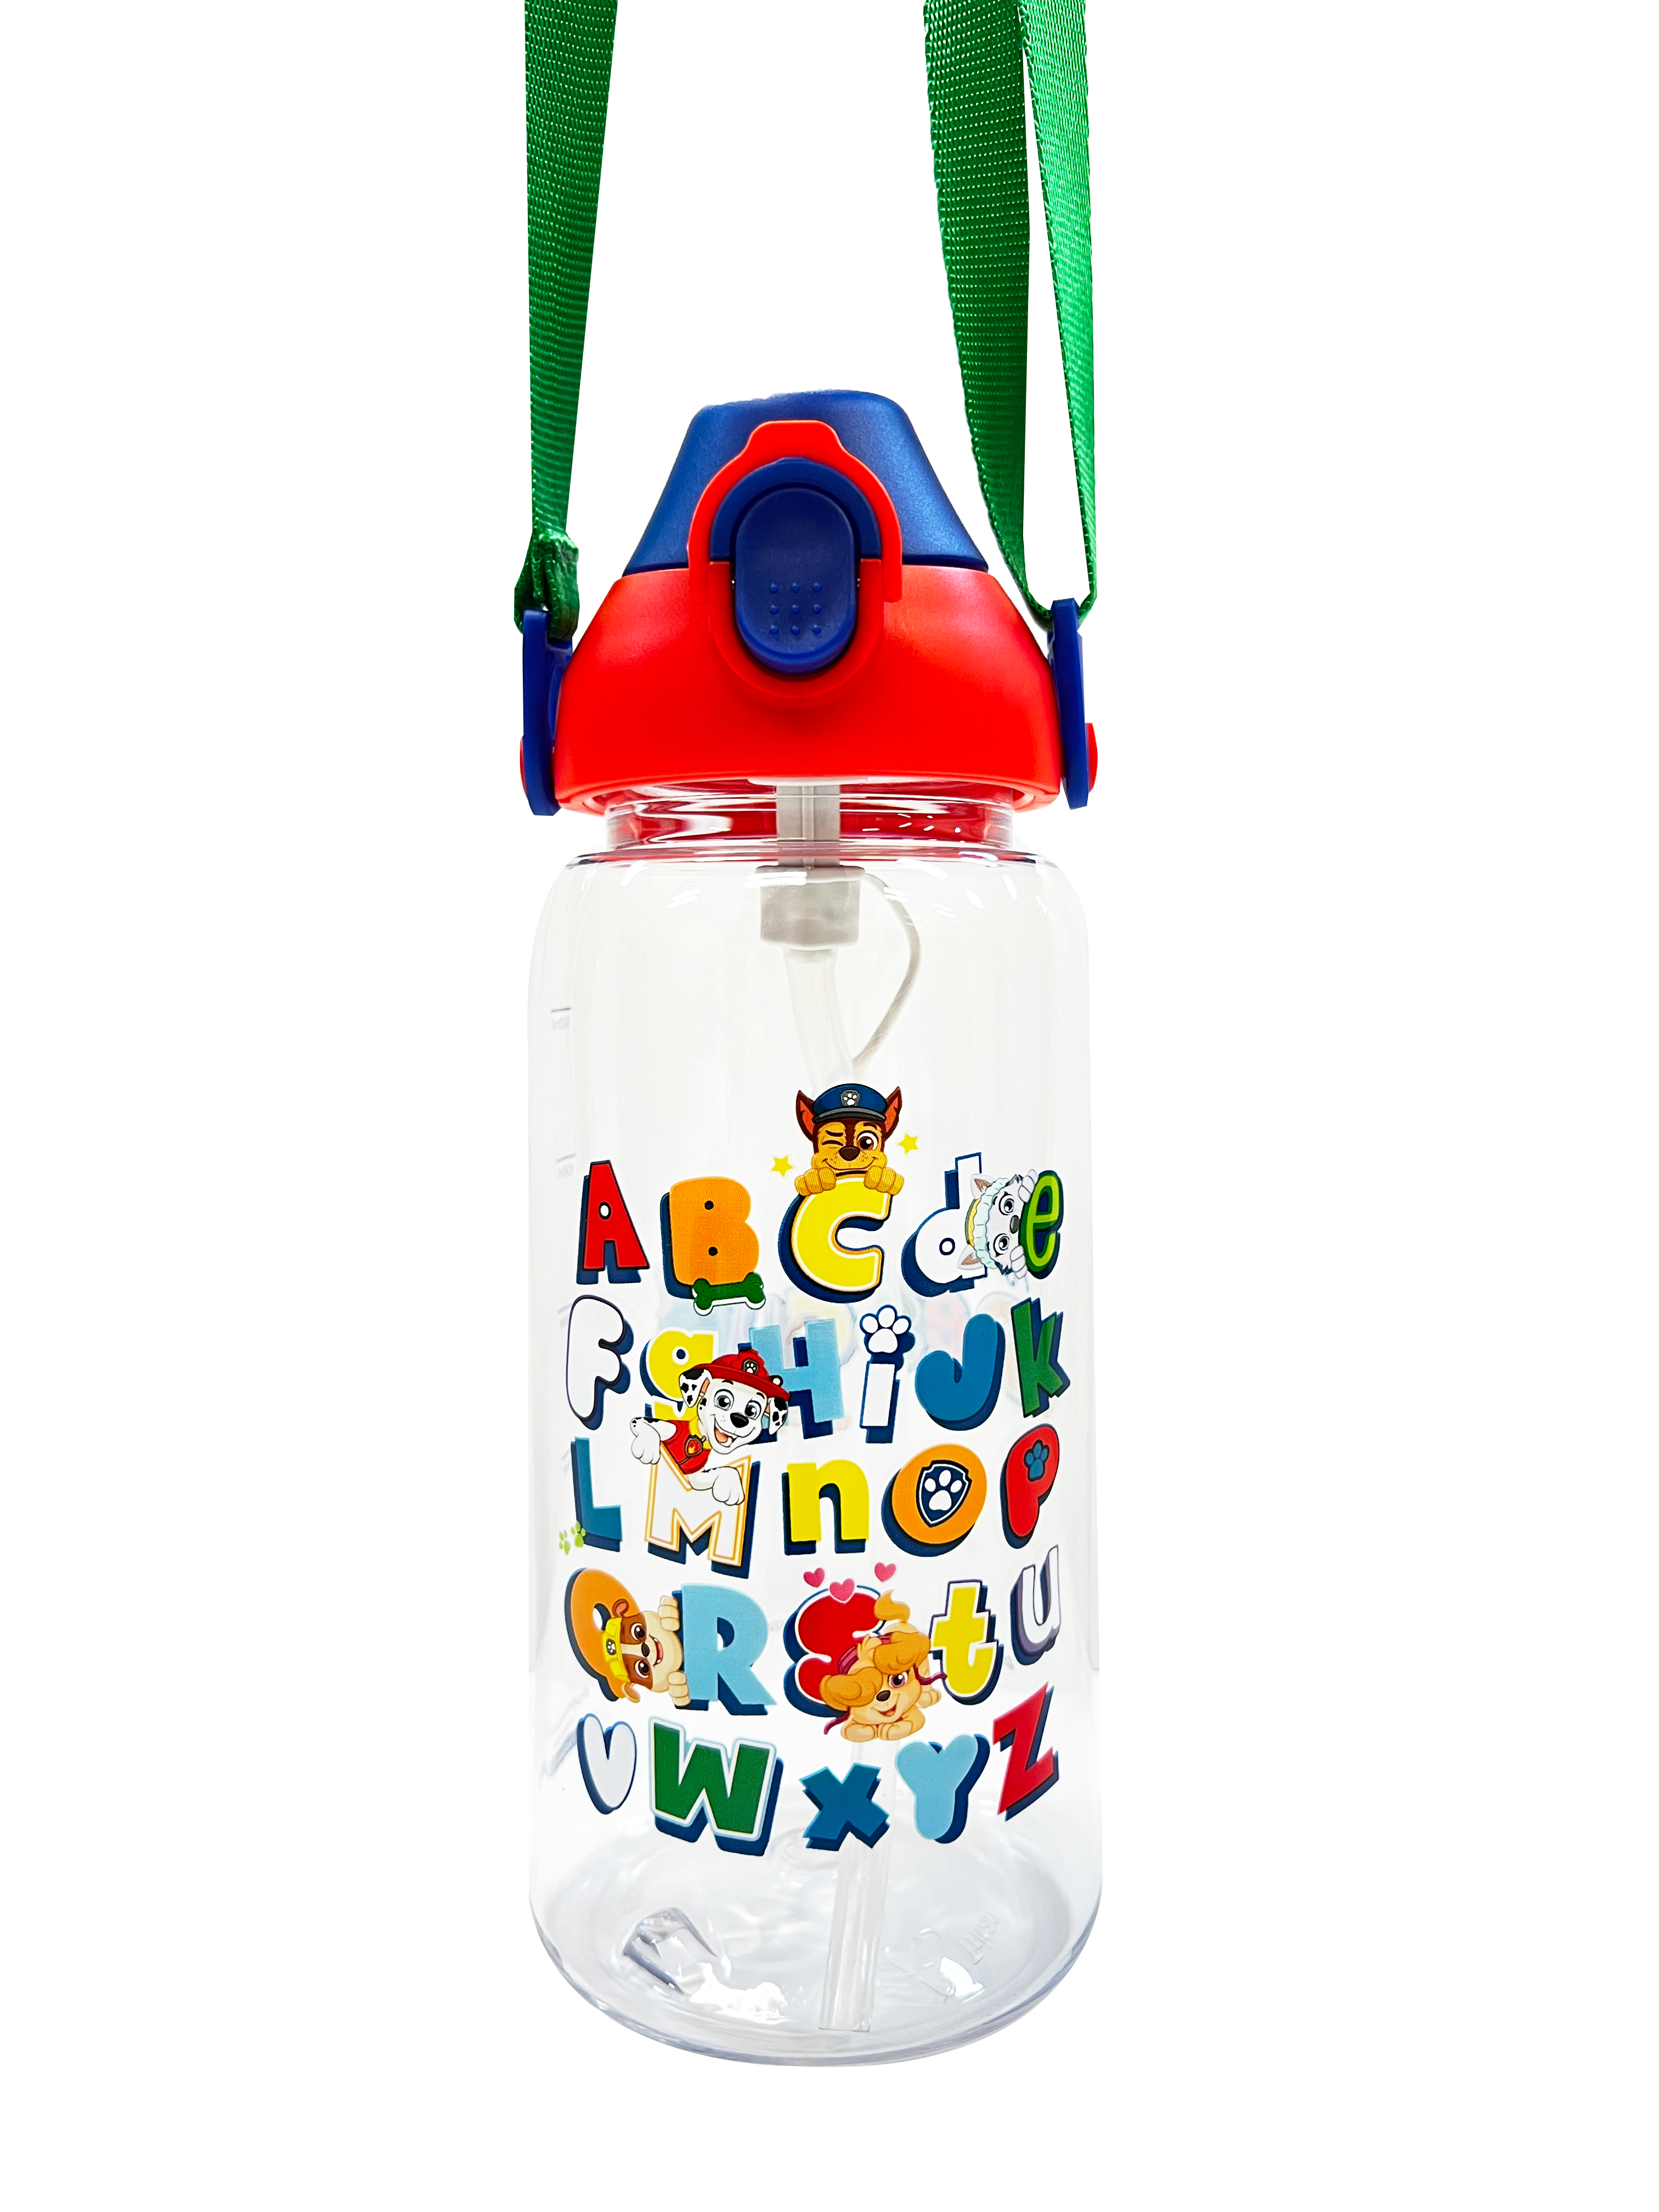 PAW PATROL Water Bottle Kids With Straw 700ml - _MS, ECTL-AUG23, ECTL-MNM30, PAW PATROL, STAT OTHER